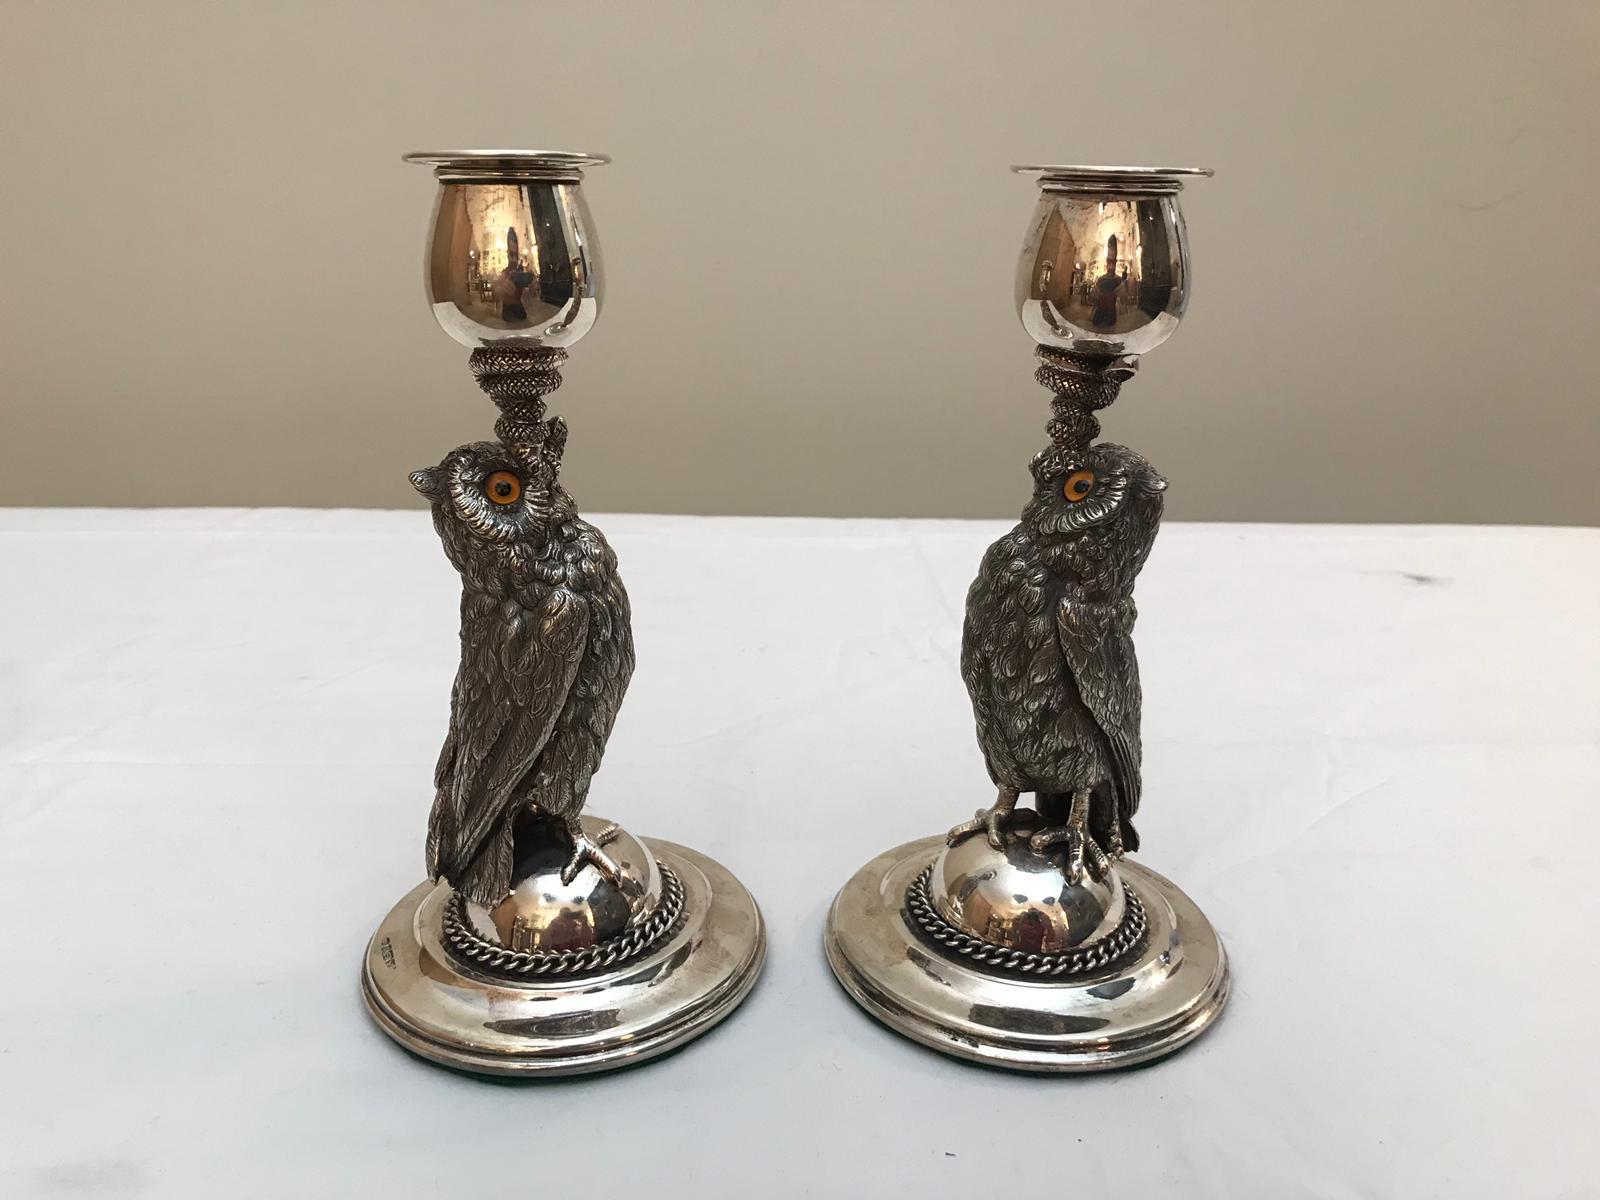 A pair of candlesticks by Roberts and Belk in the form of an owl with a snake. The owls have glass eyes.